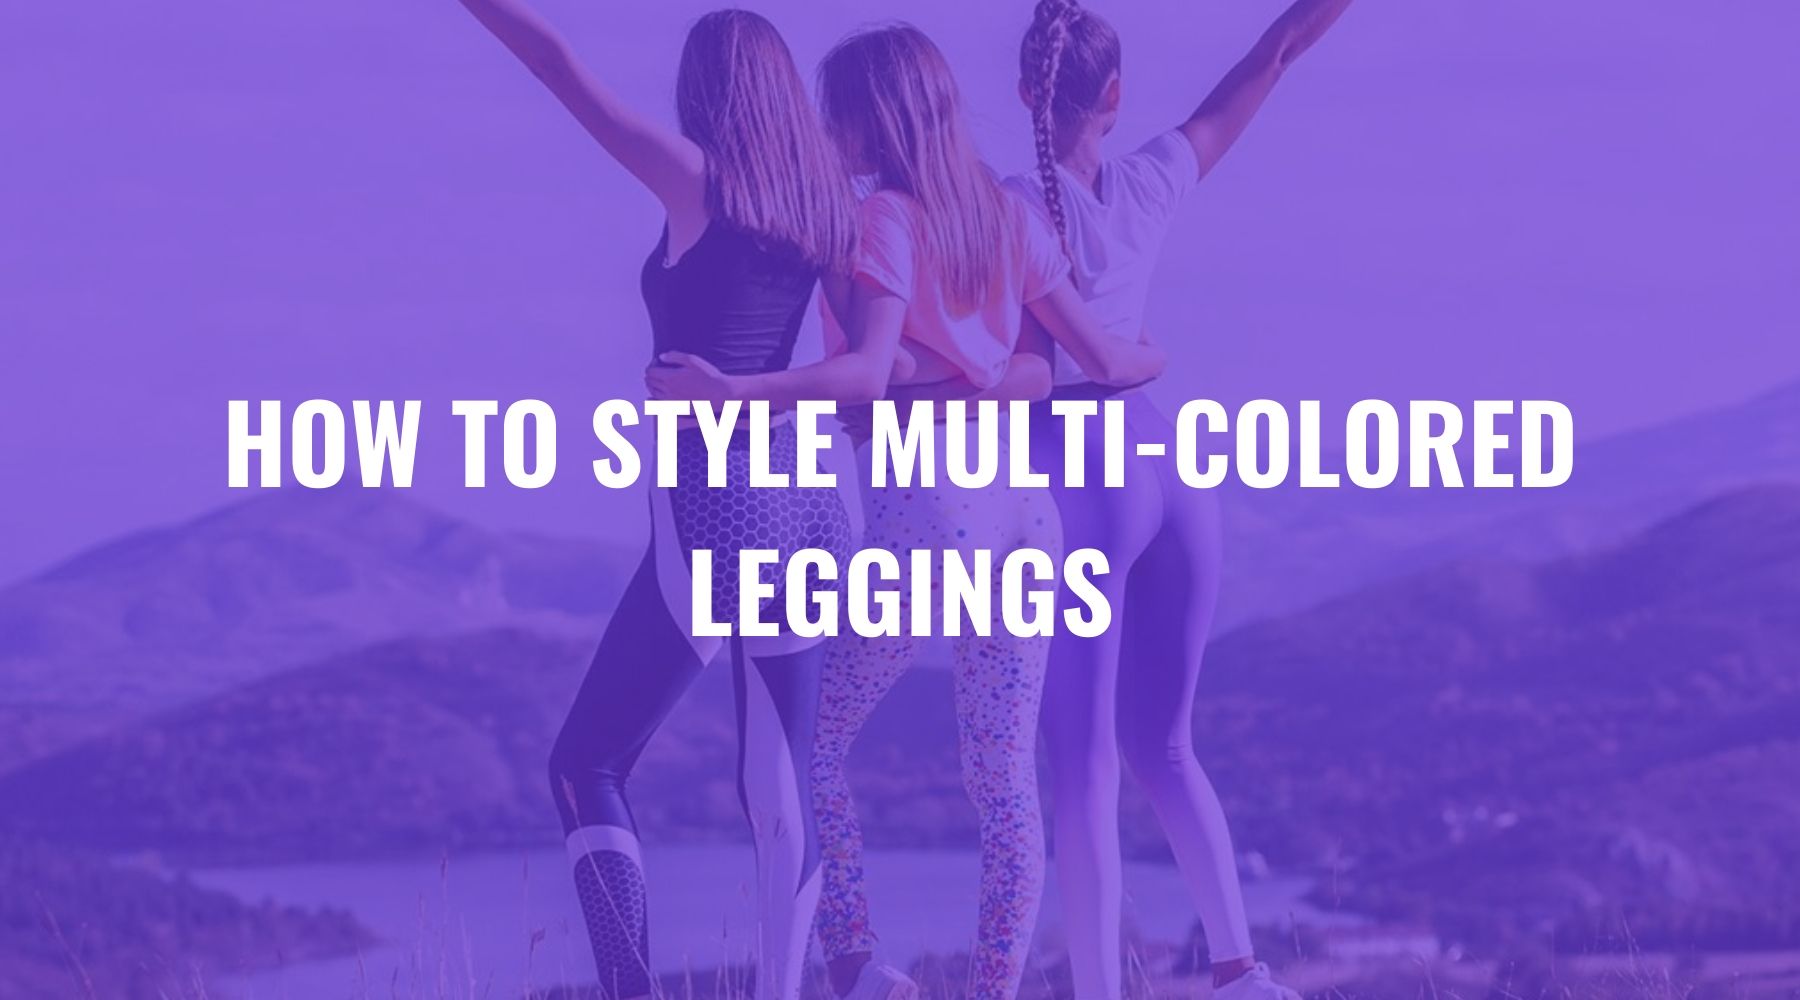 How to Style Multi-Colored Leggings